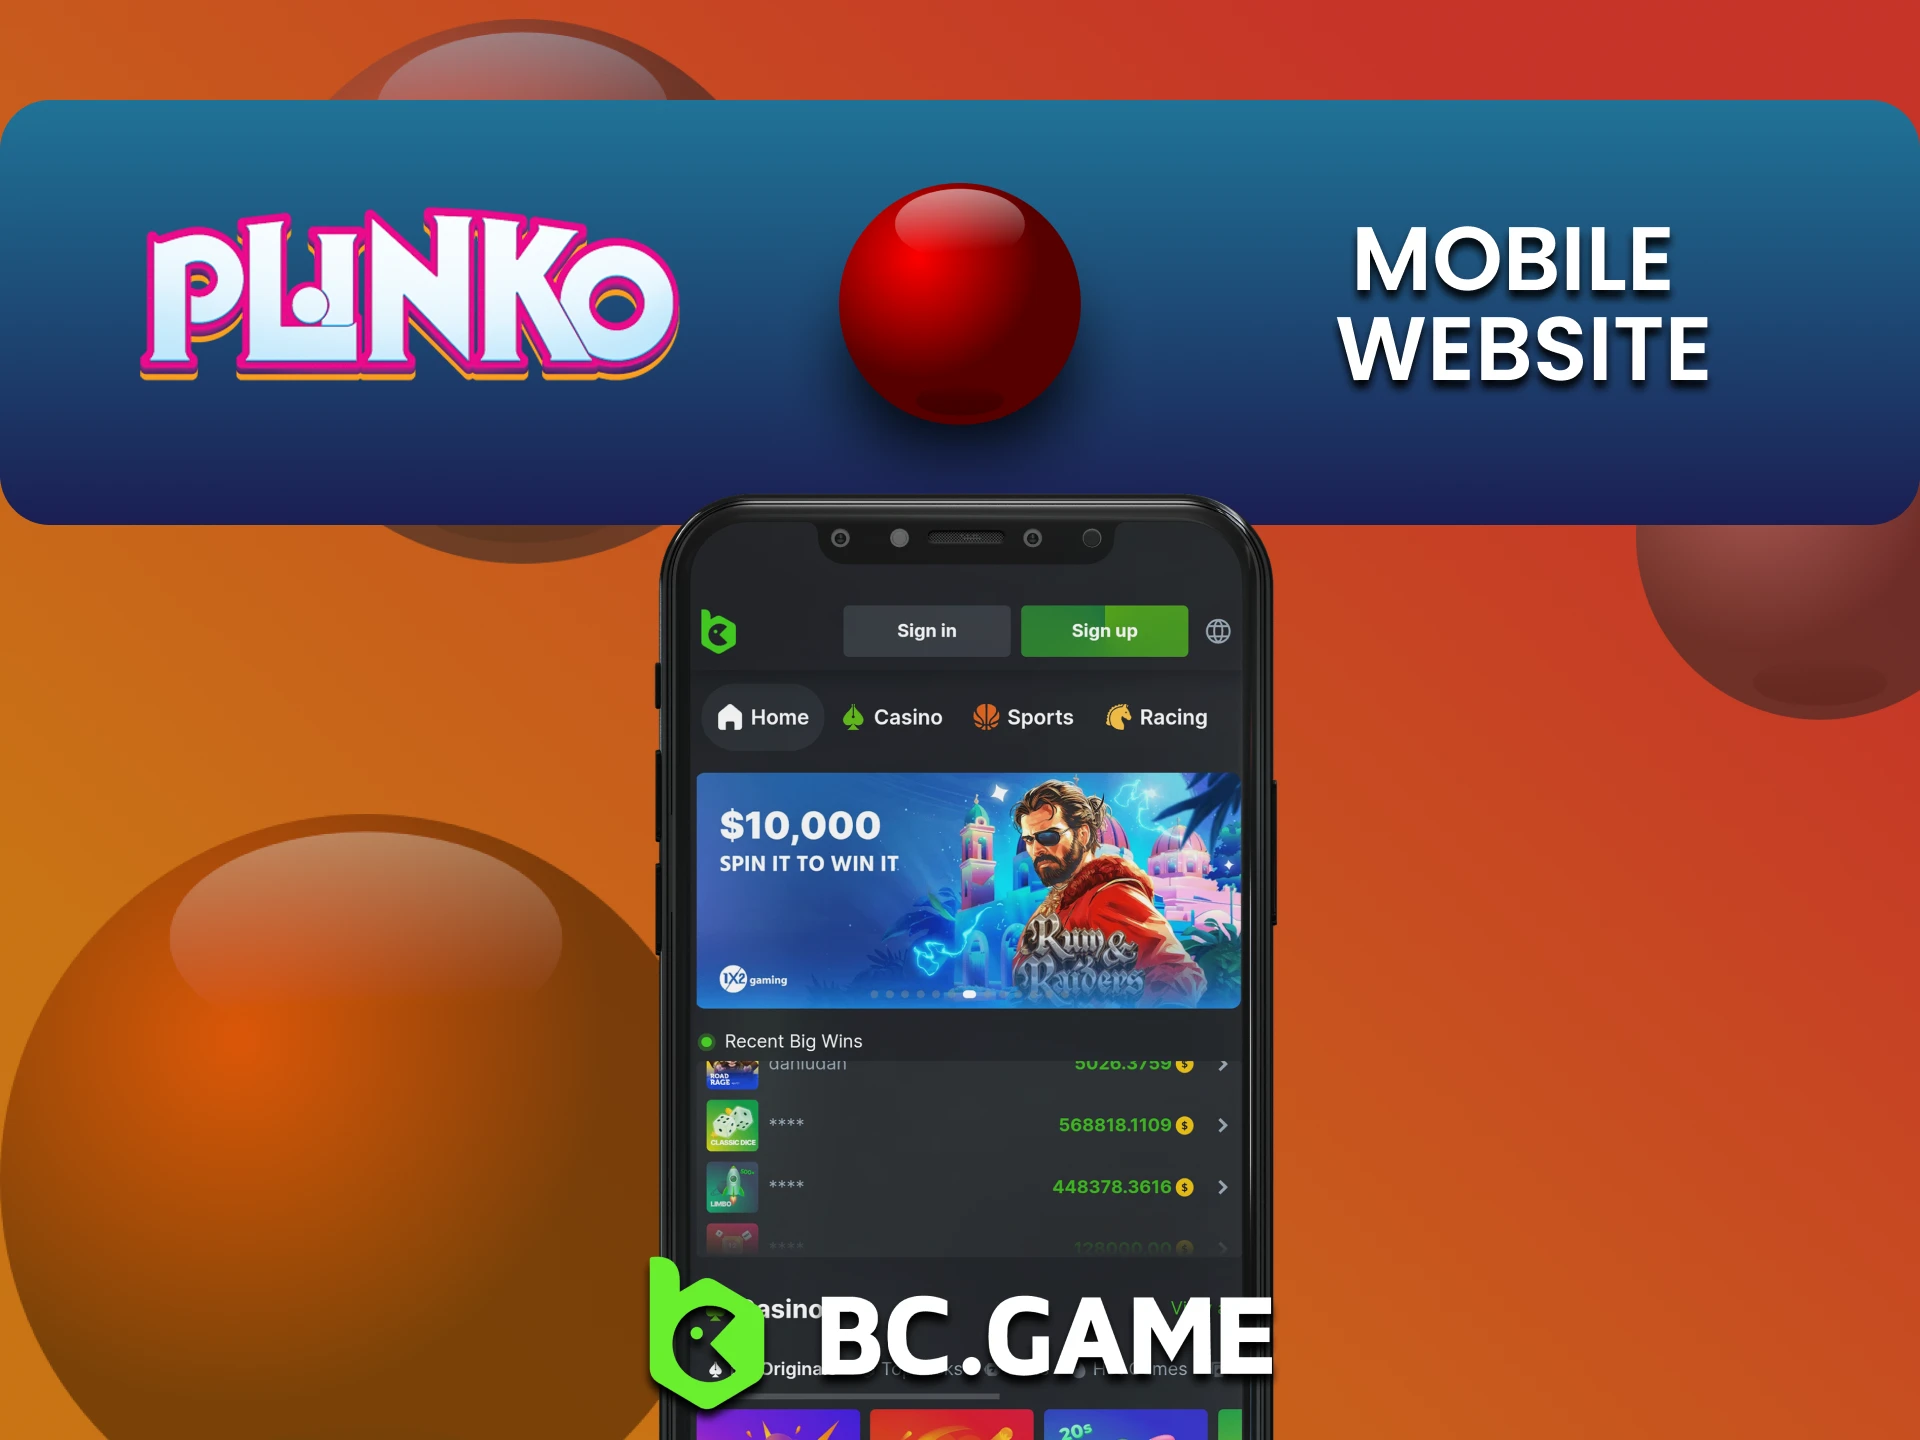 Visit the mobile version of the BCGame website to play Plinko.